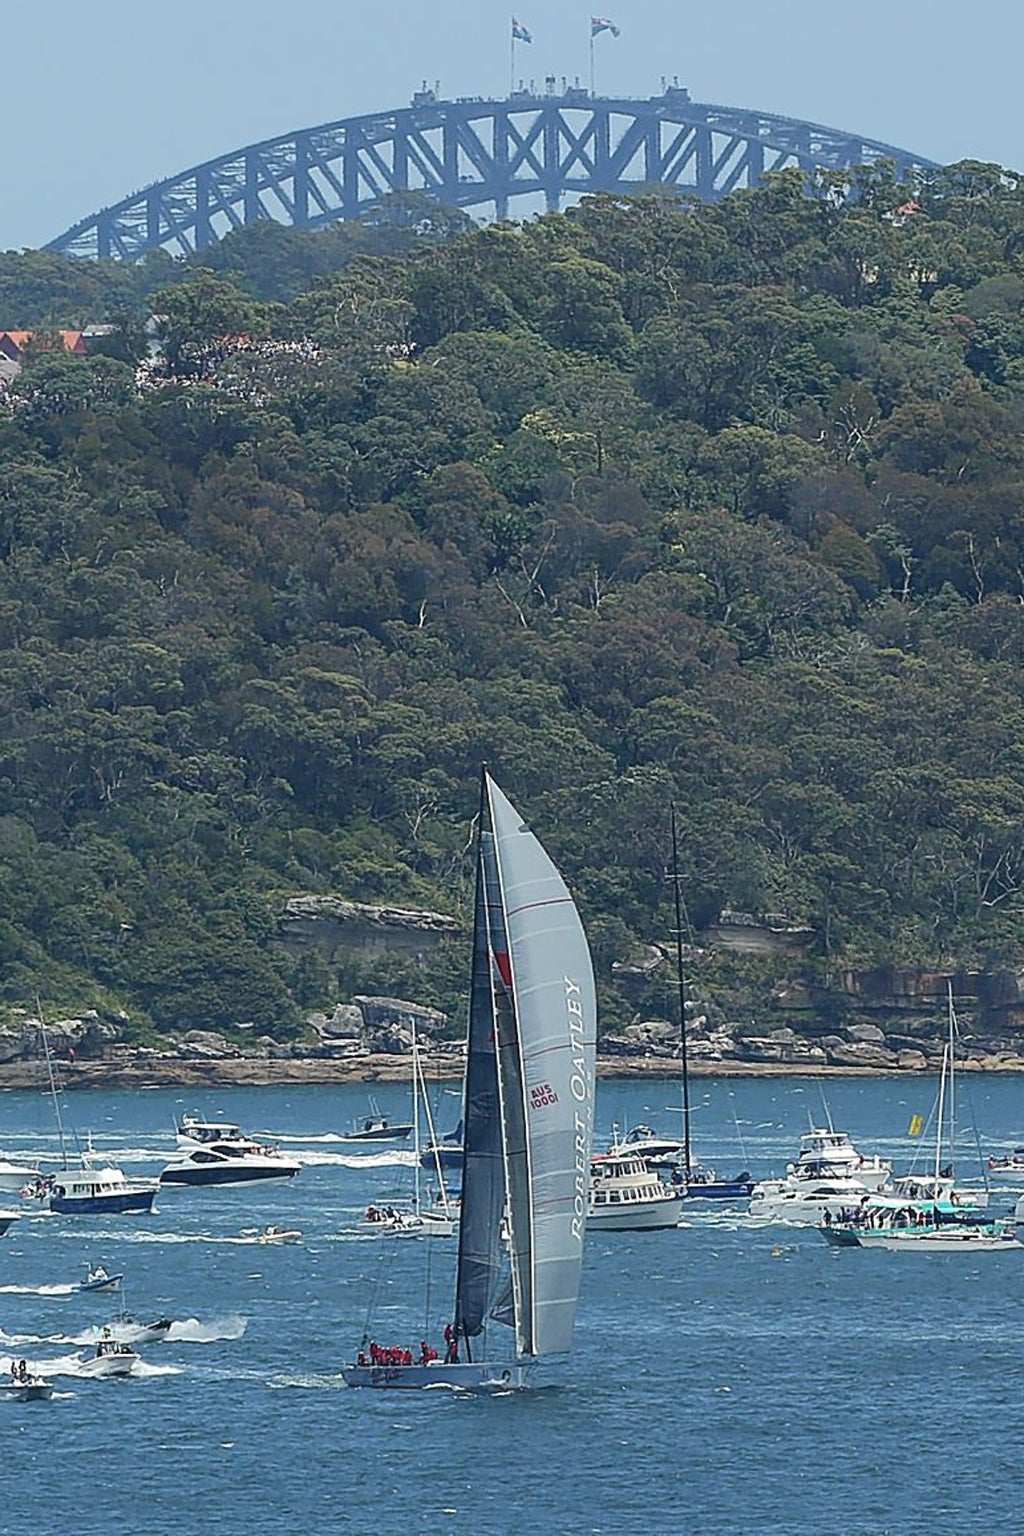 Wild thing: The 100-footer Wild Oats in this year’s Sydney to Hobart race getty